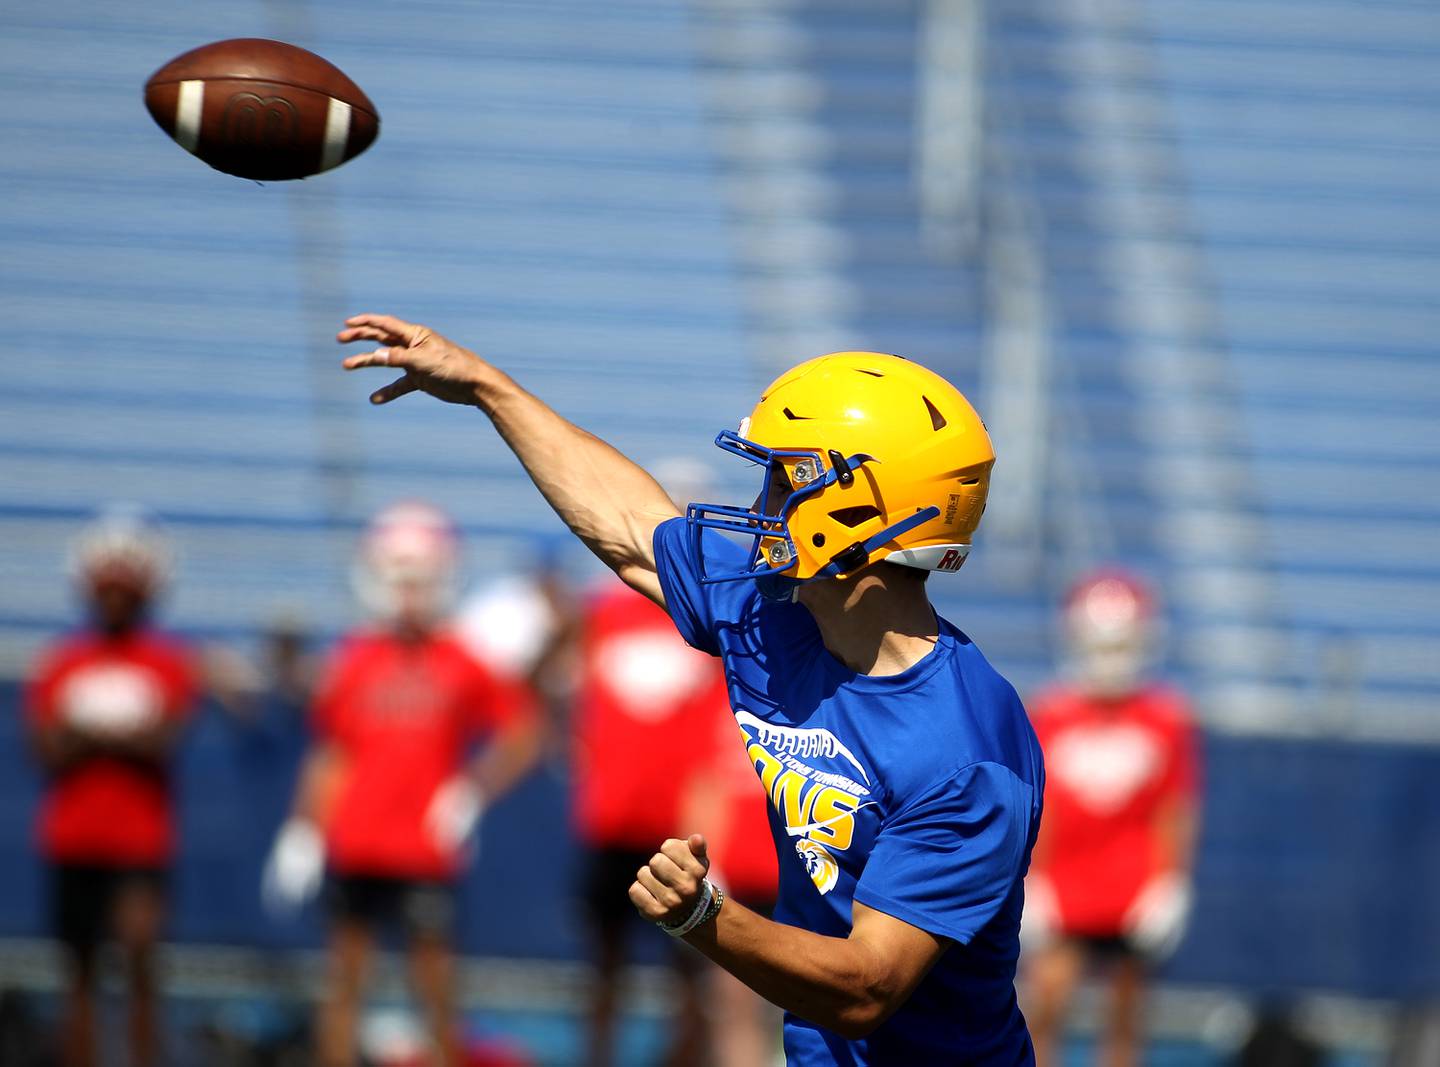 Lyons Township quarterback Joey Antonietti throws the ball during a 7-on-7 tournament hosted by Lyons Township on Thursday, July 1, 2021. York, Wheaton Warrenville South and Marist also participated in the tournament.